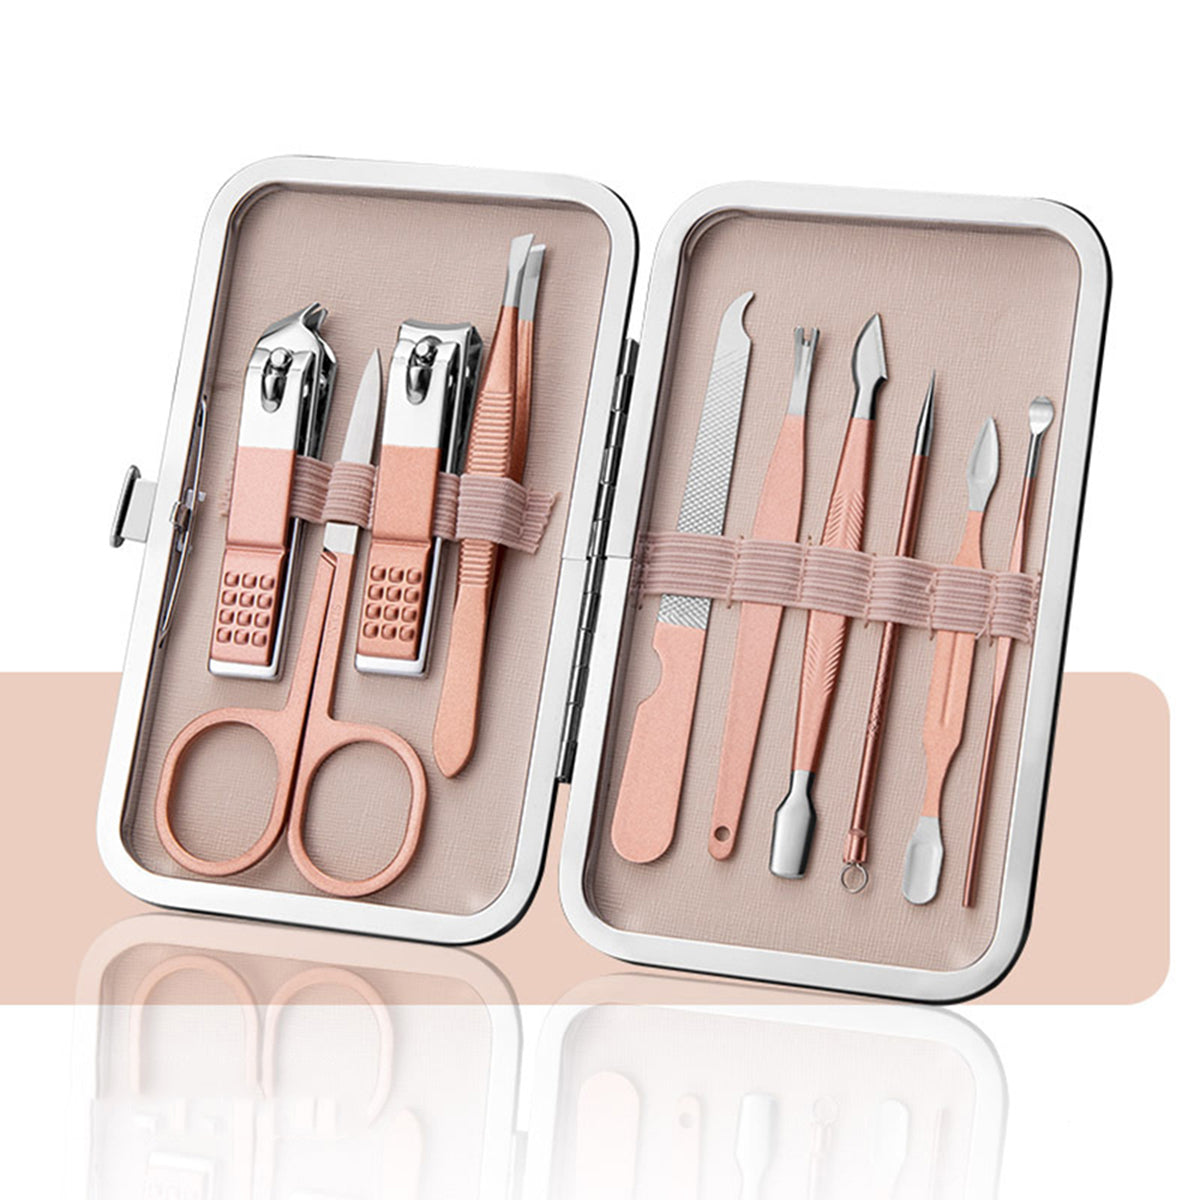 Stainless Steel Manicure Set with Pink Case